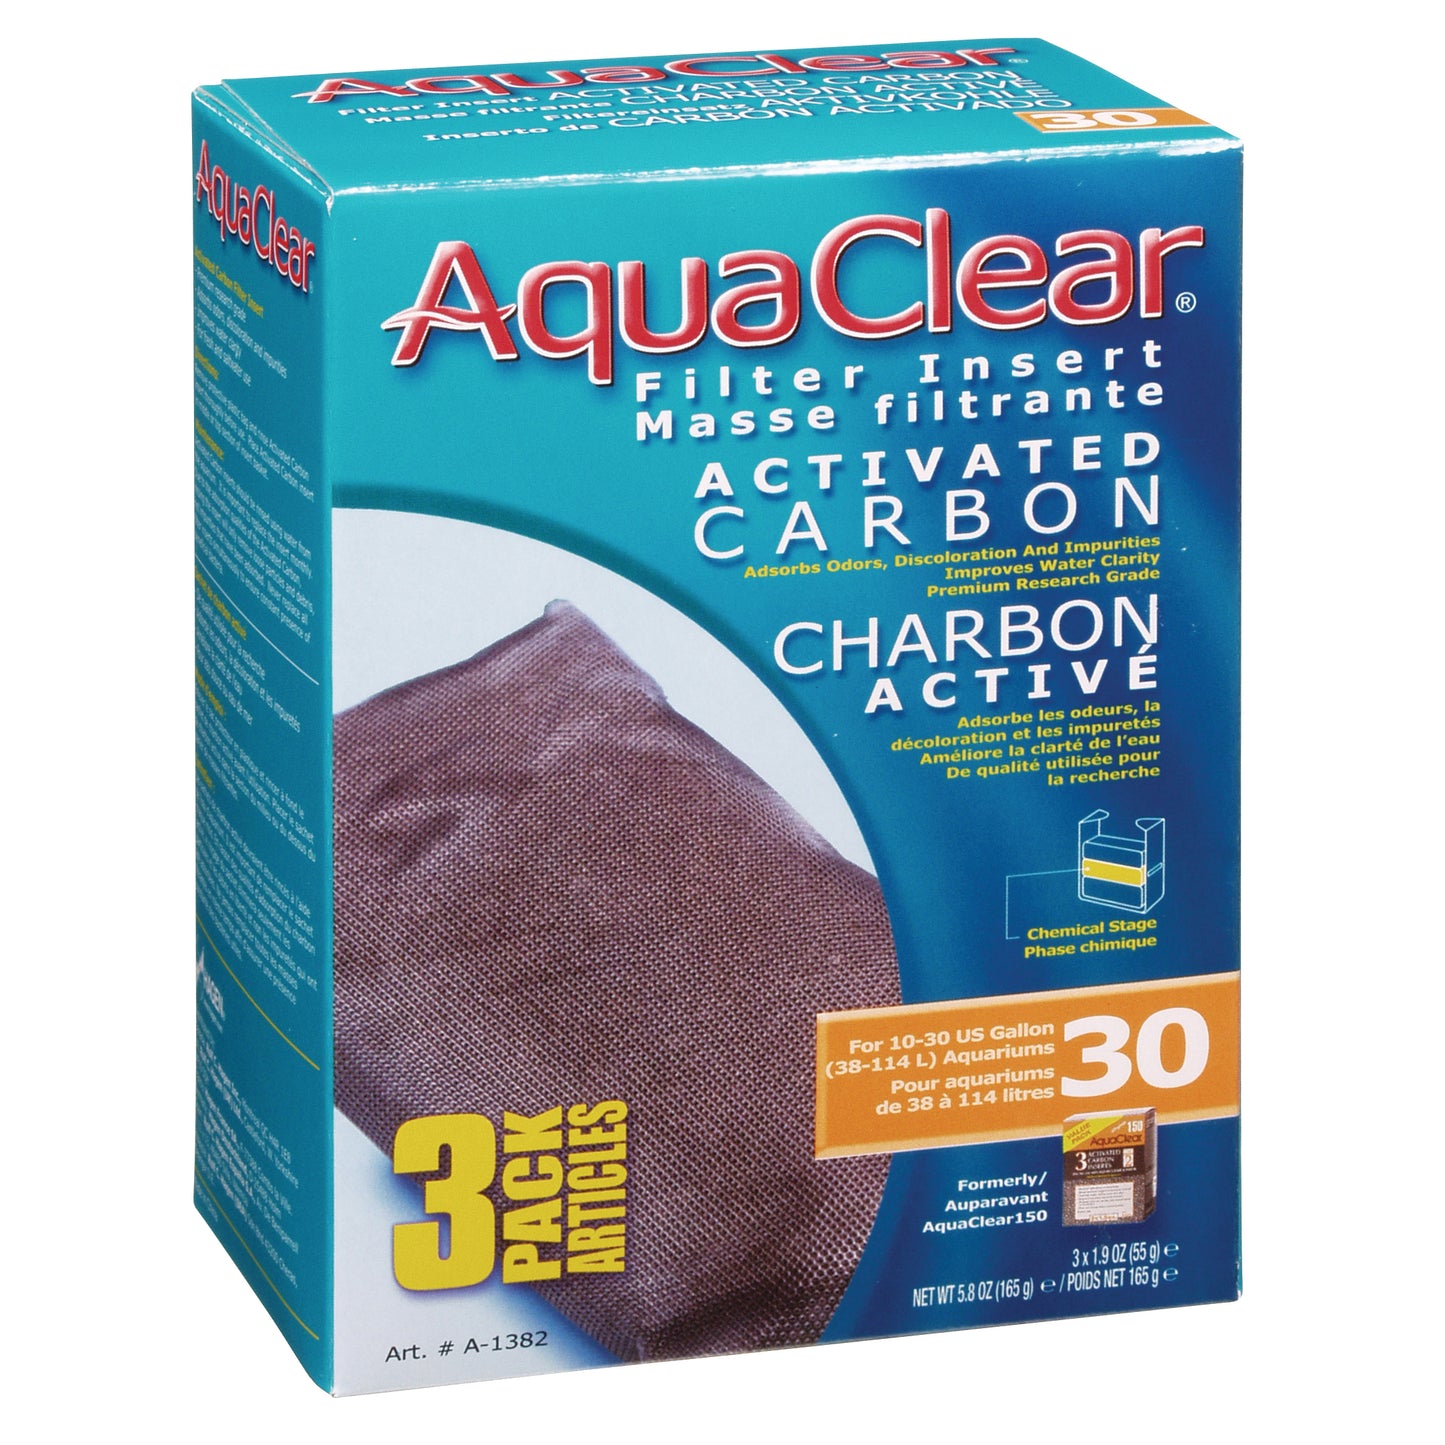 AquaClear 30 Activated Carbon Filter Insert, 3-Pack